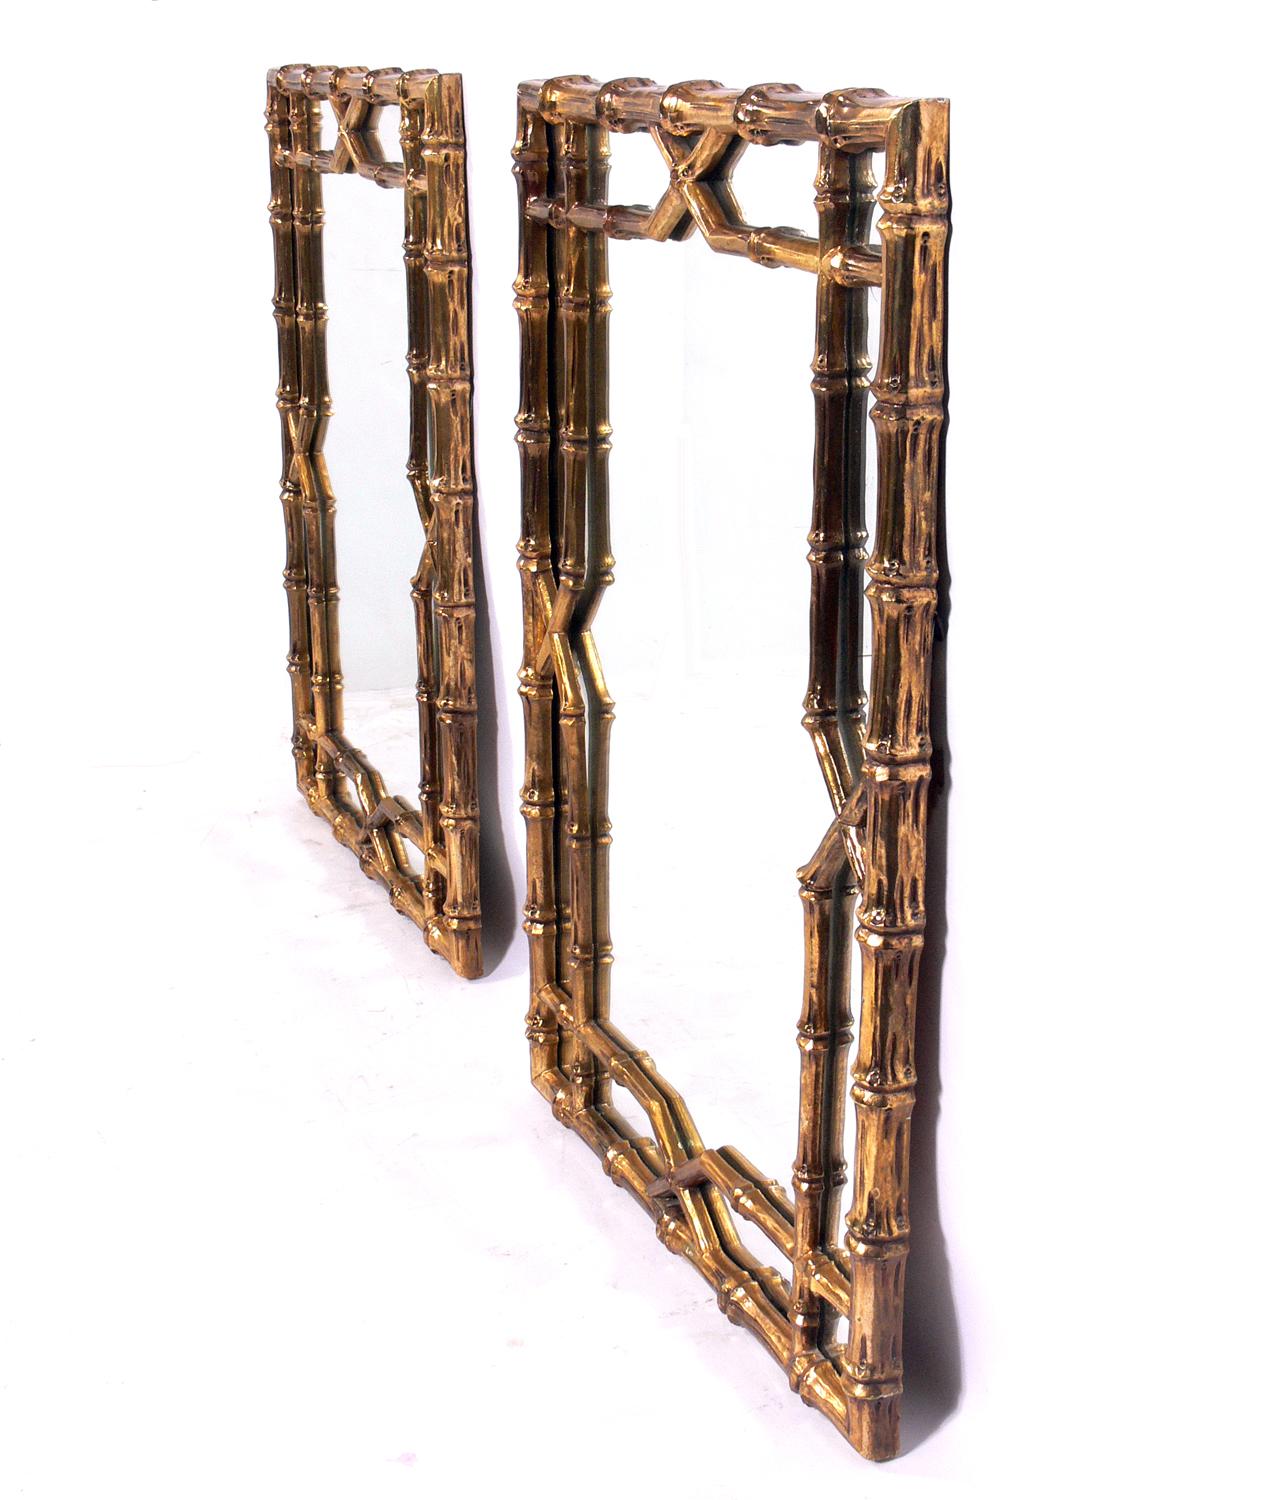 Gilt faux bamboo mirrors, American, circa 1950s. They retain their warm original patina. They are priced at $4800 for the pair or $2600 for each mirror.